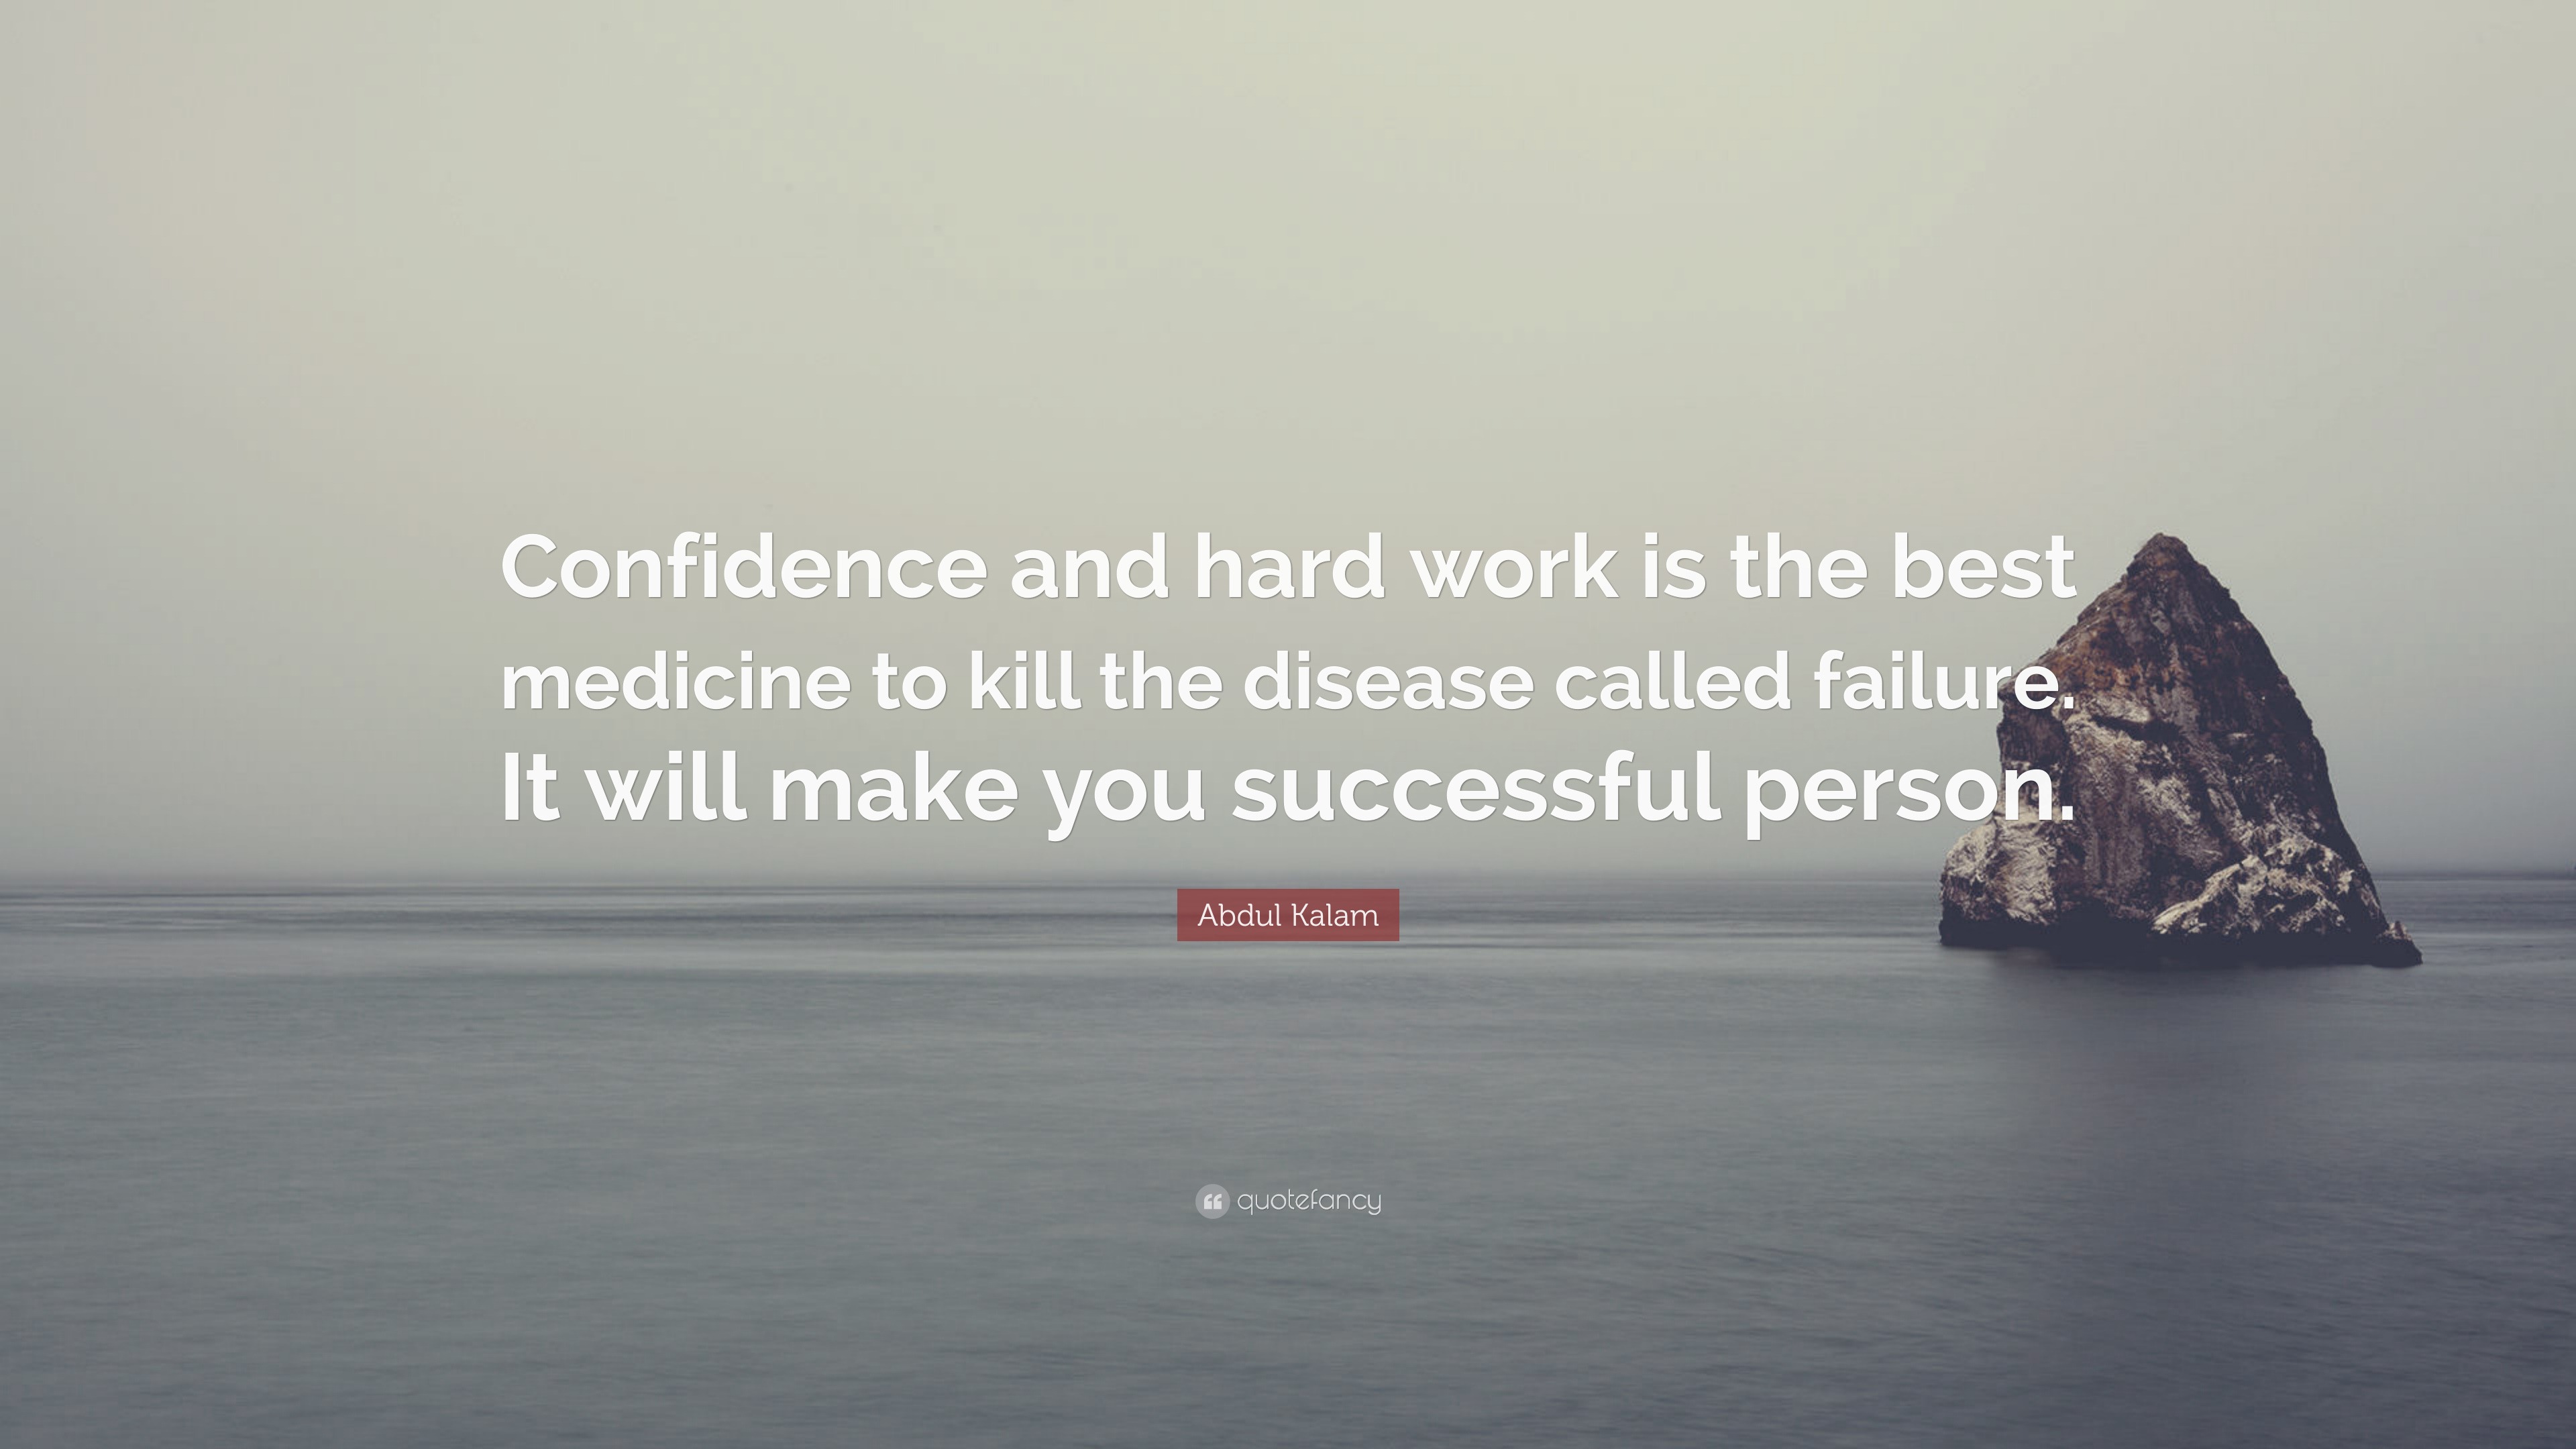 Abdul Kalam Quote: “Confidence and hard work is the best medicine to